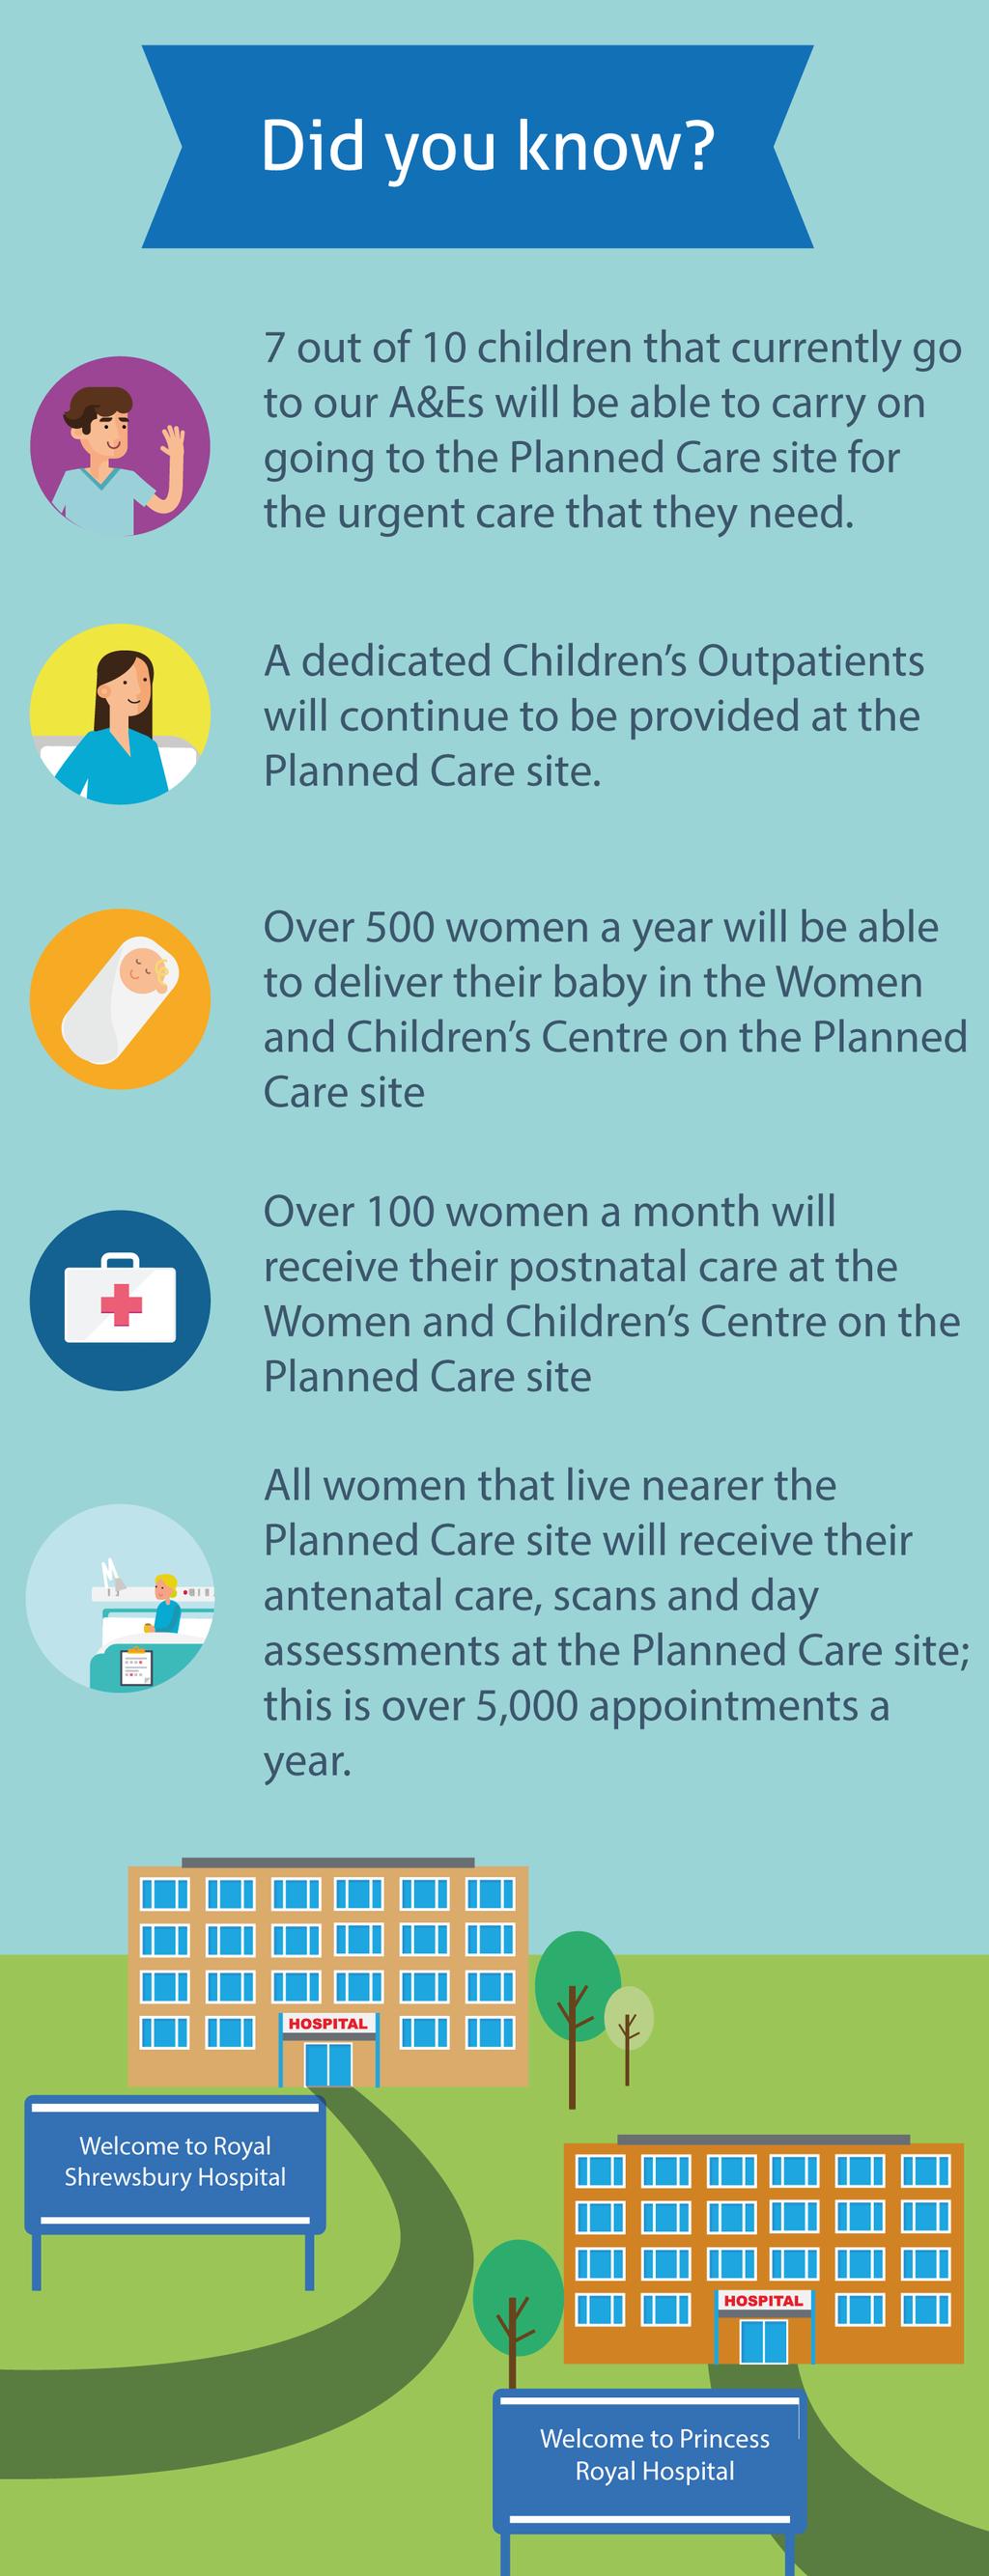 A number of our mums and children would still access women and children s services at the Planned Care site which would continue to provide the majority of local services including.